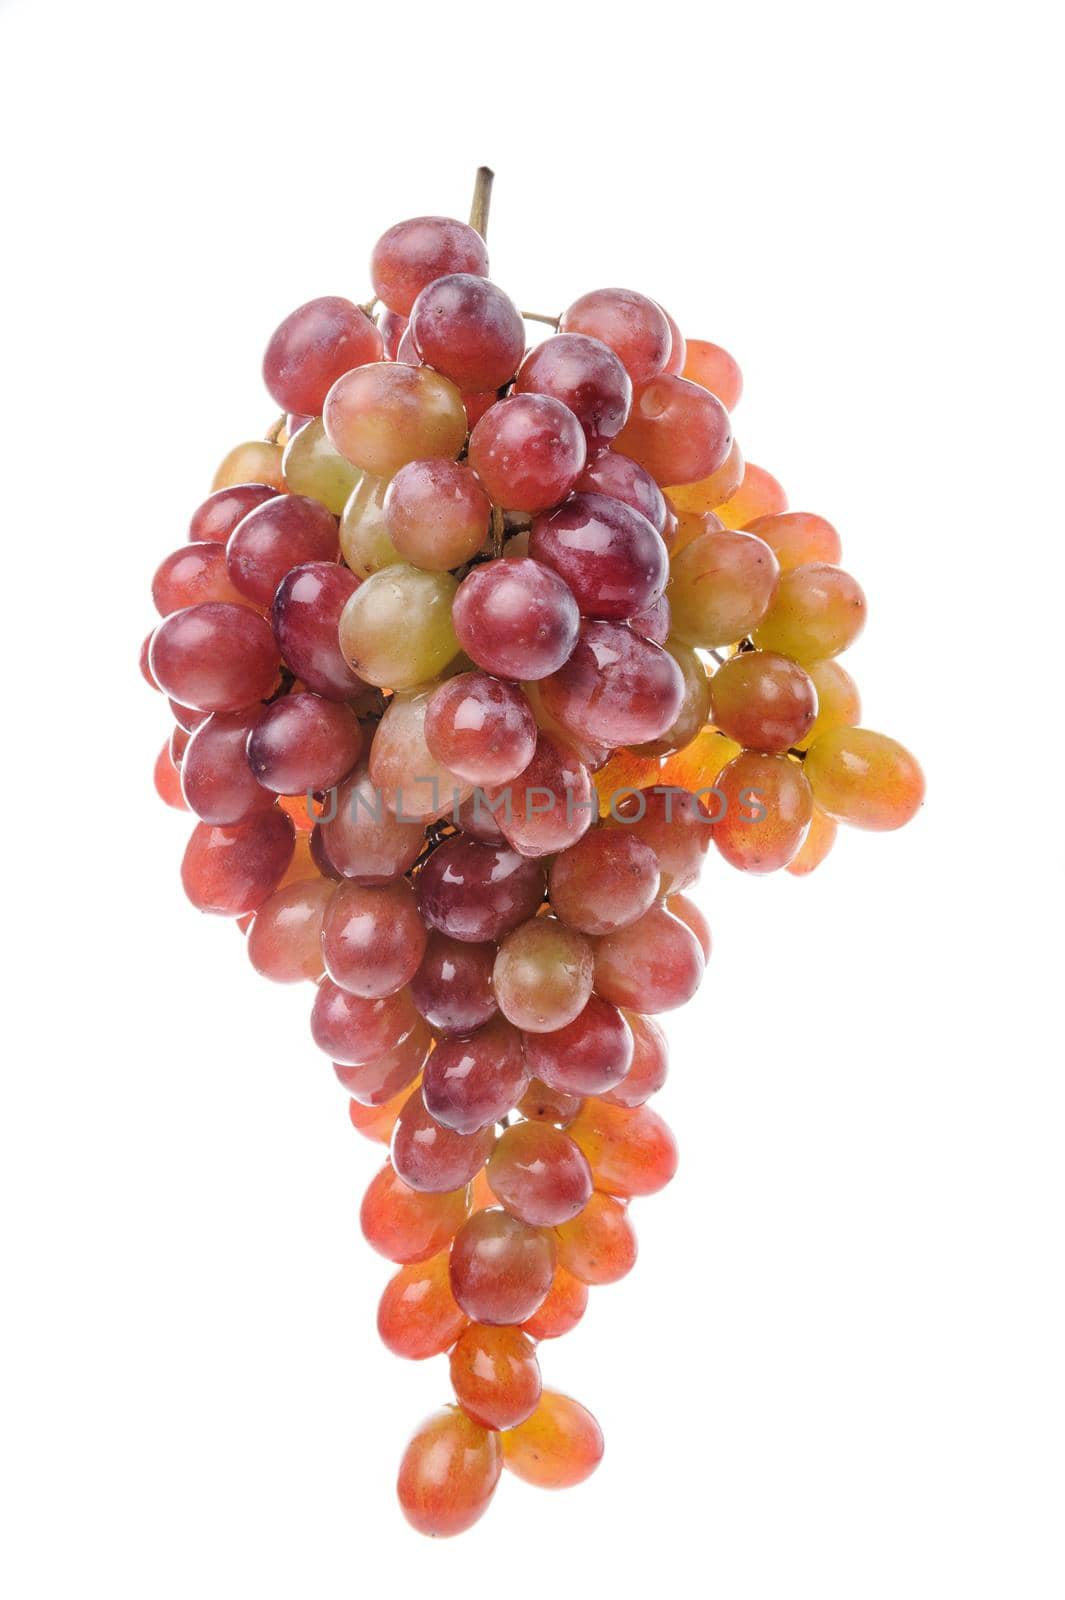 red grapes by norgal